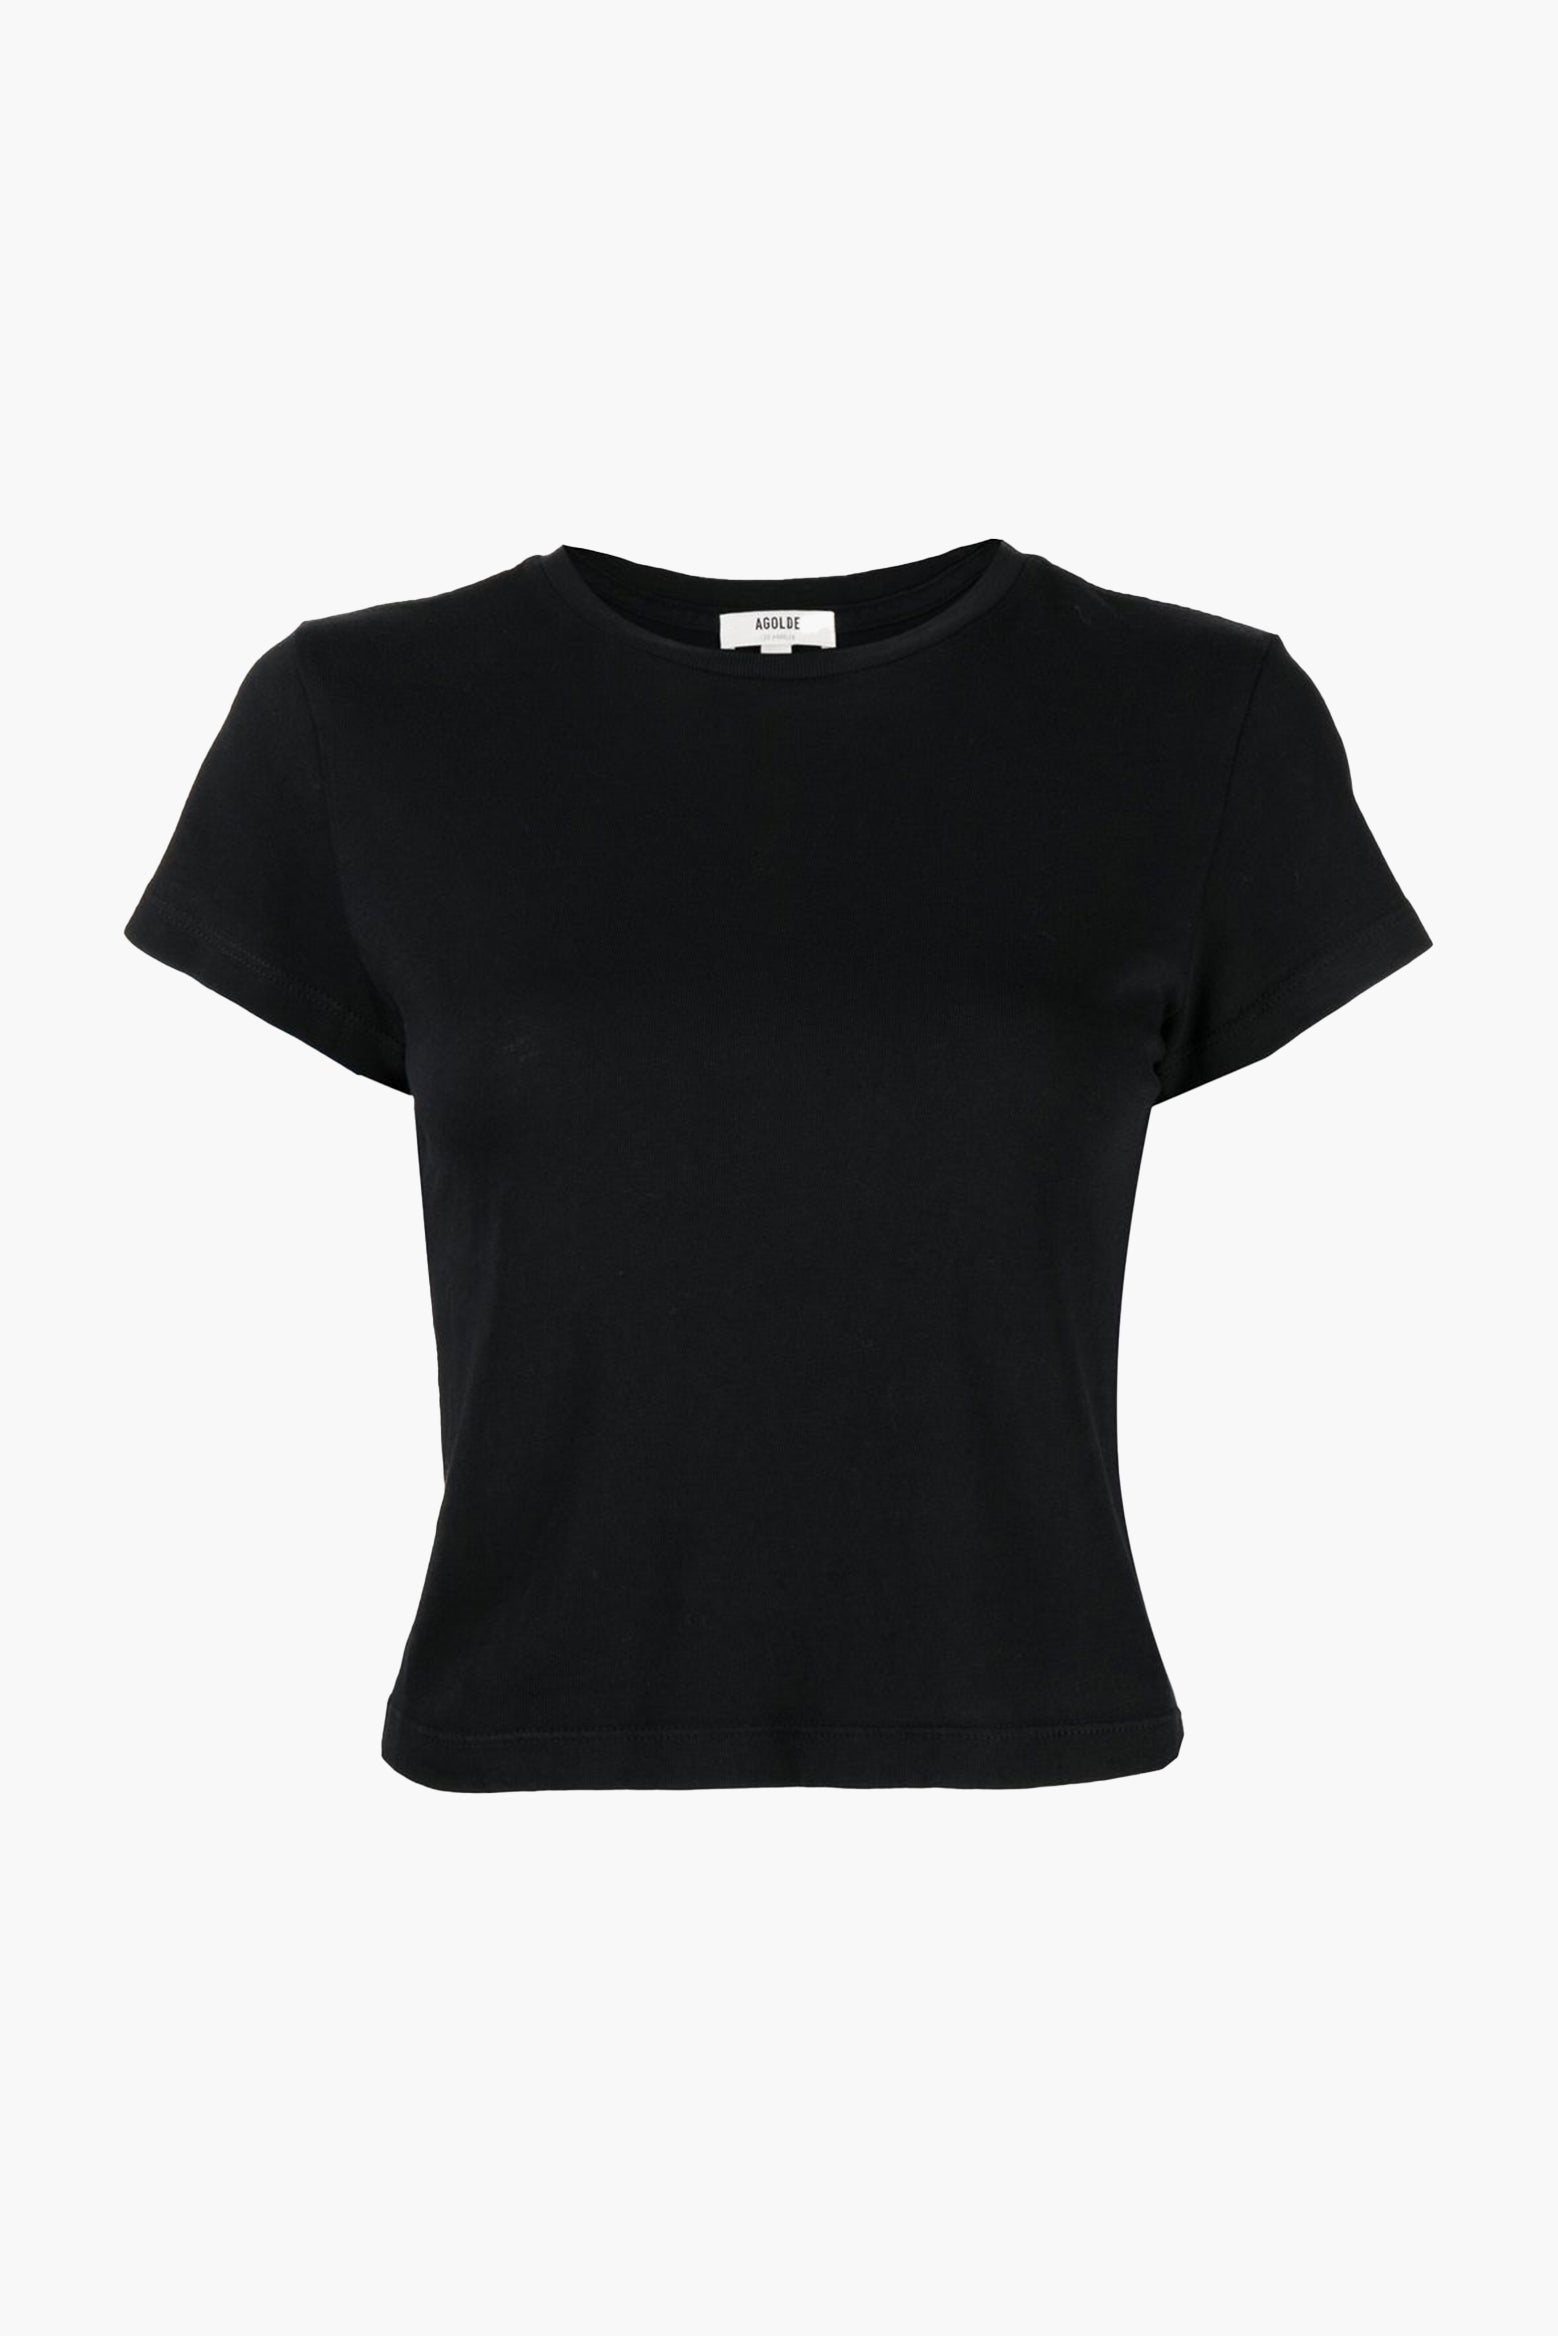 The Agolde Adine Shrunken Tee in Black available at The New Trend Australia